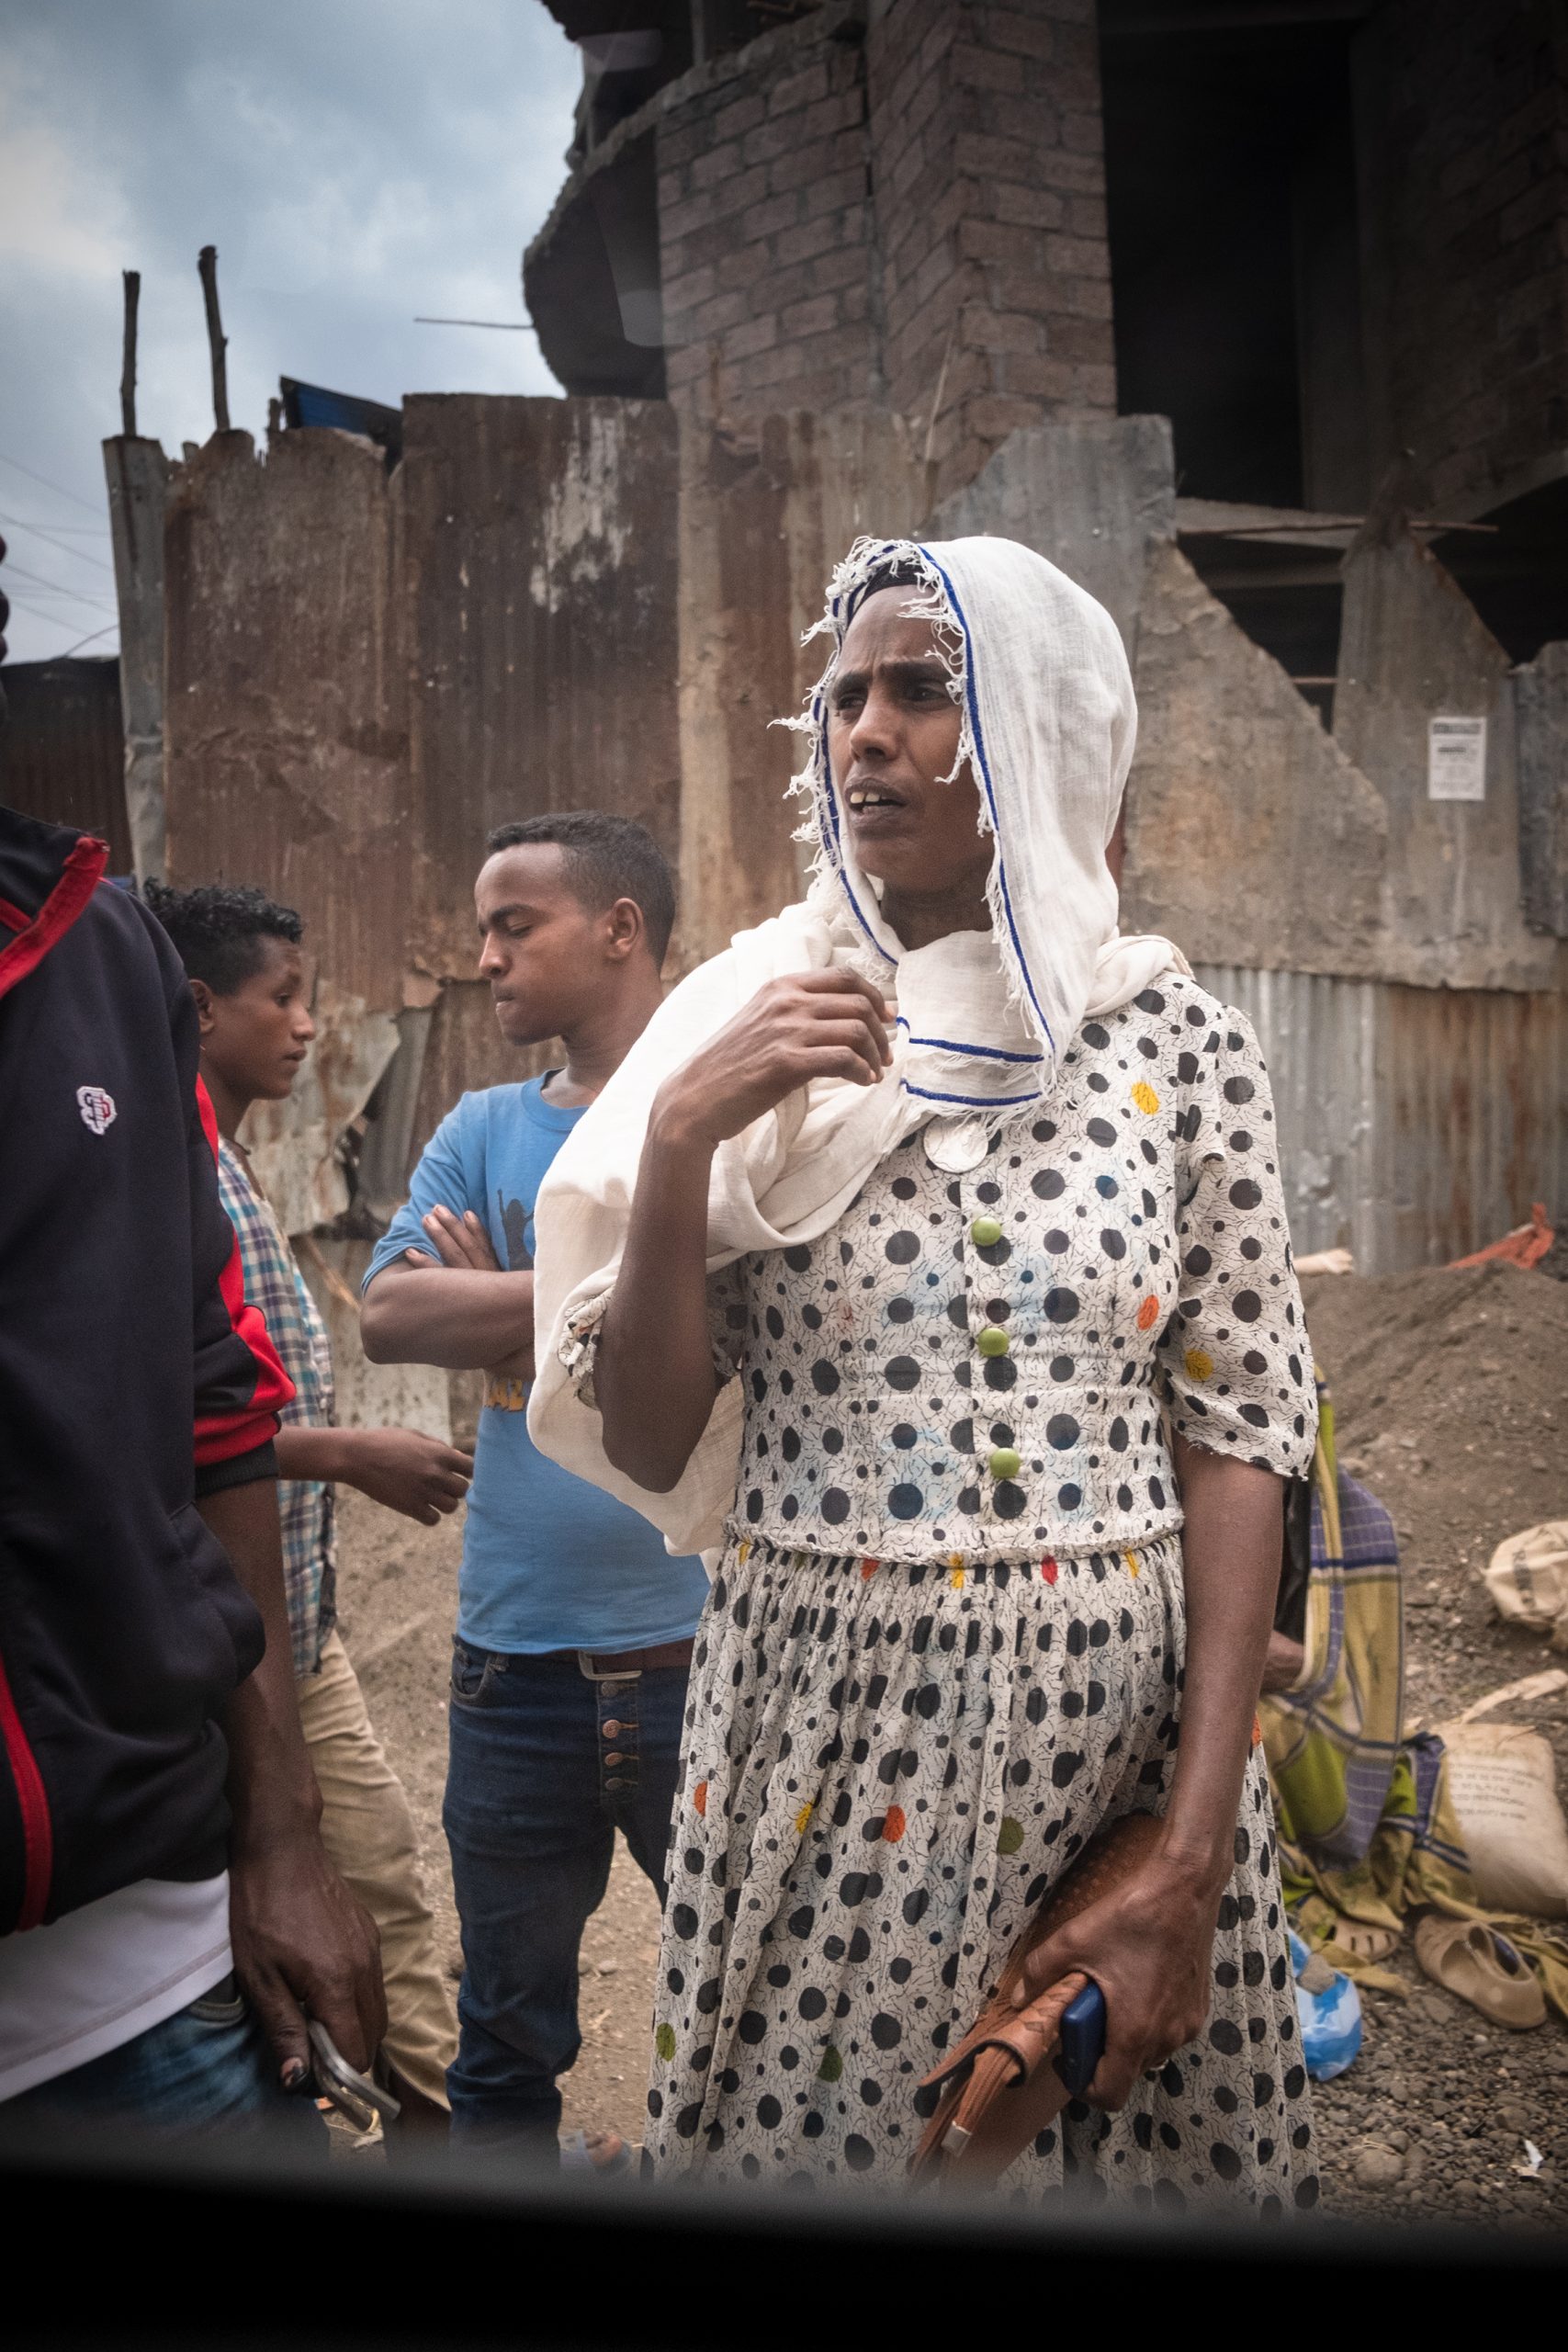     Paul Bettings, On the streets of Gondar, Ethiopia., 2019

